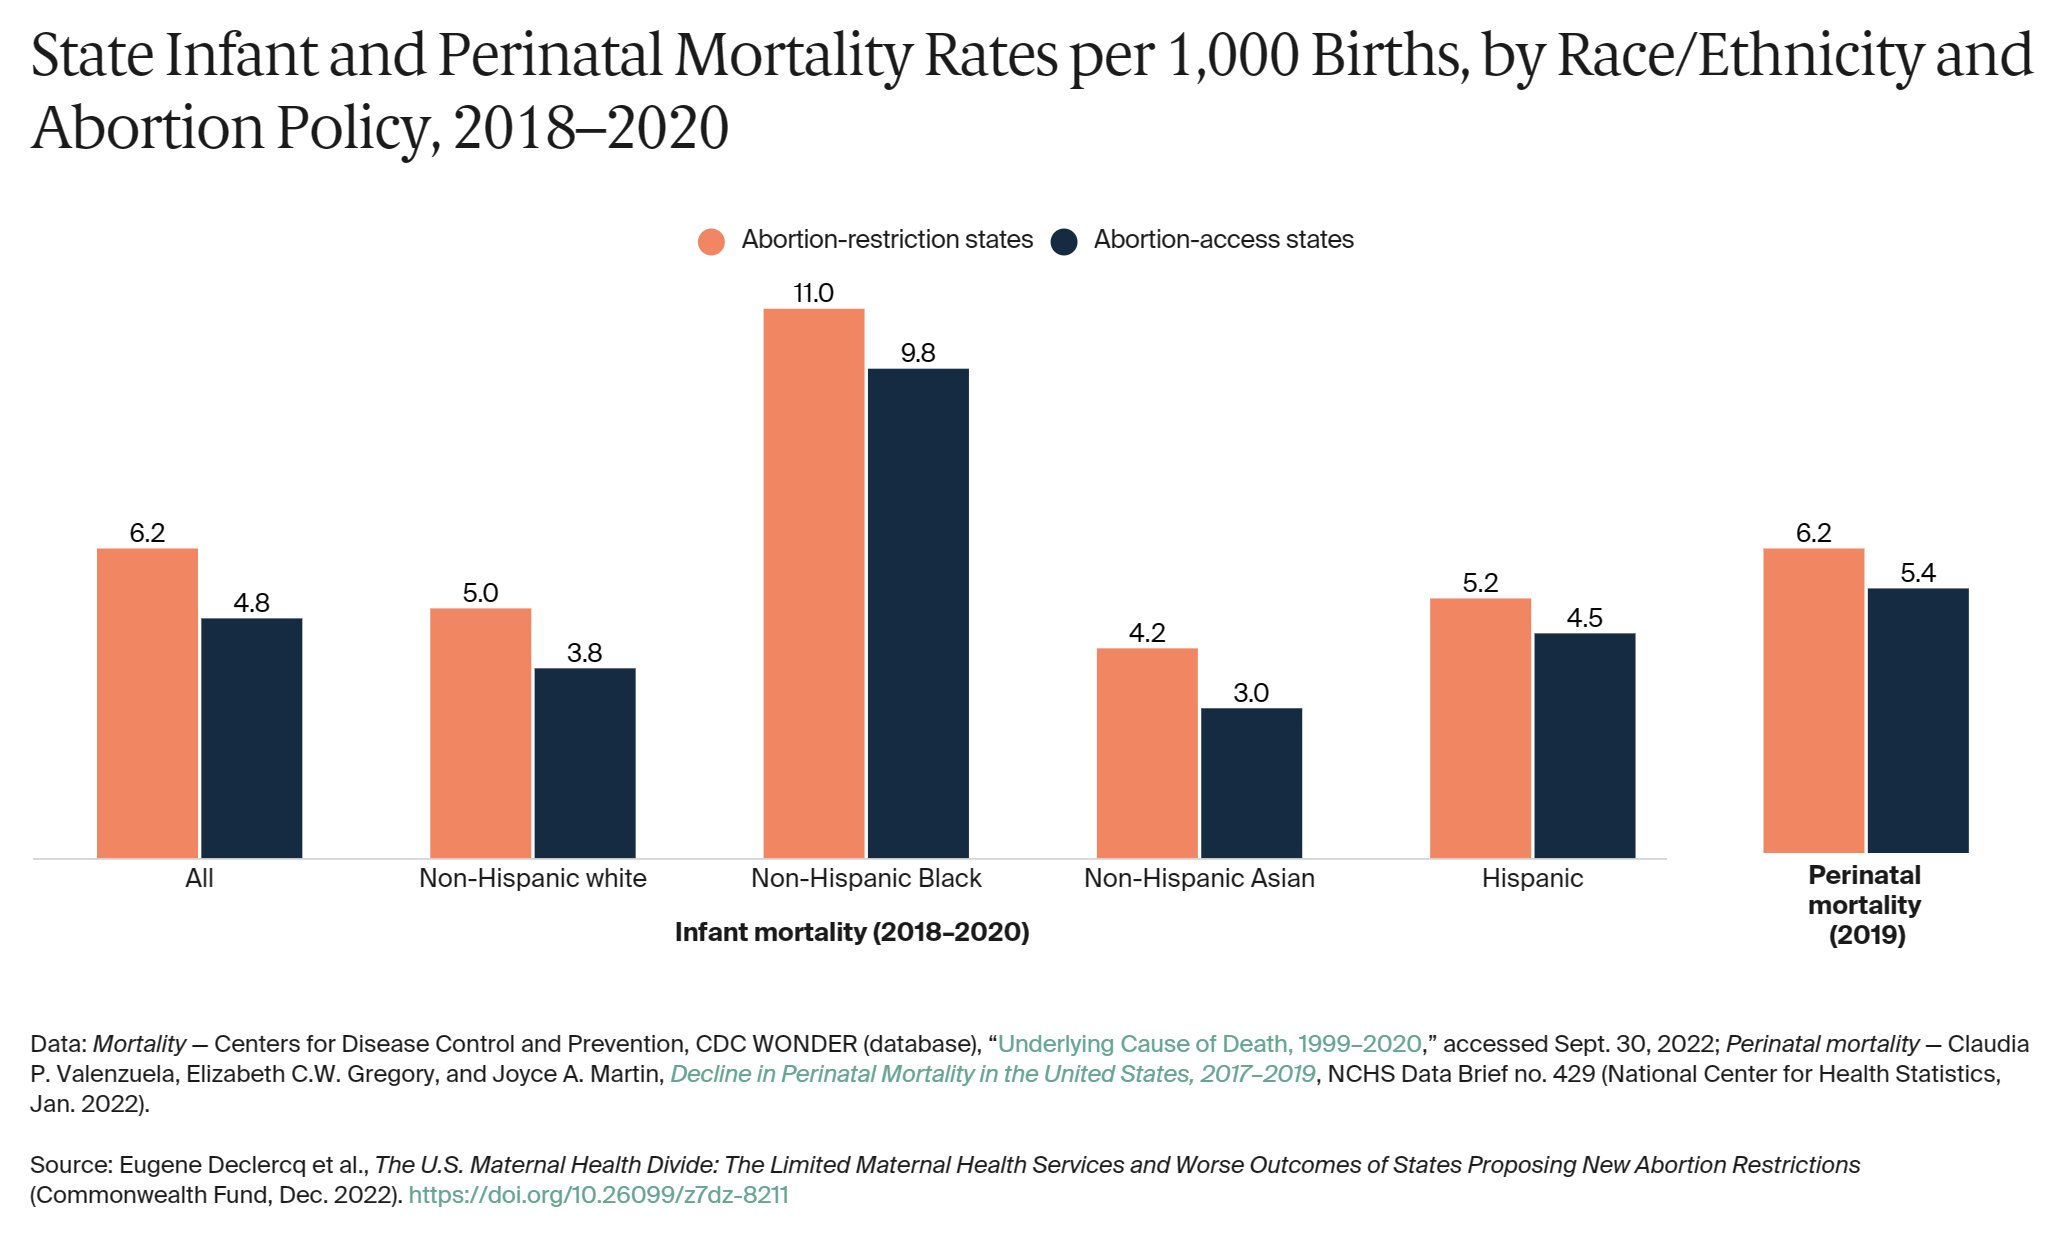 State Infant and Perinatal Mortality Rates per 1,000 Births, by Race/Ethnicity and Abortion Policy, 2018-2020. Graphic: Commonwealth Fund
